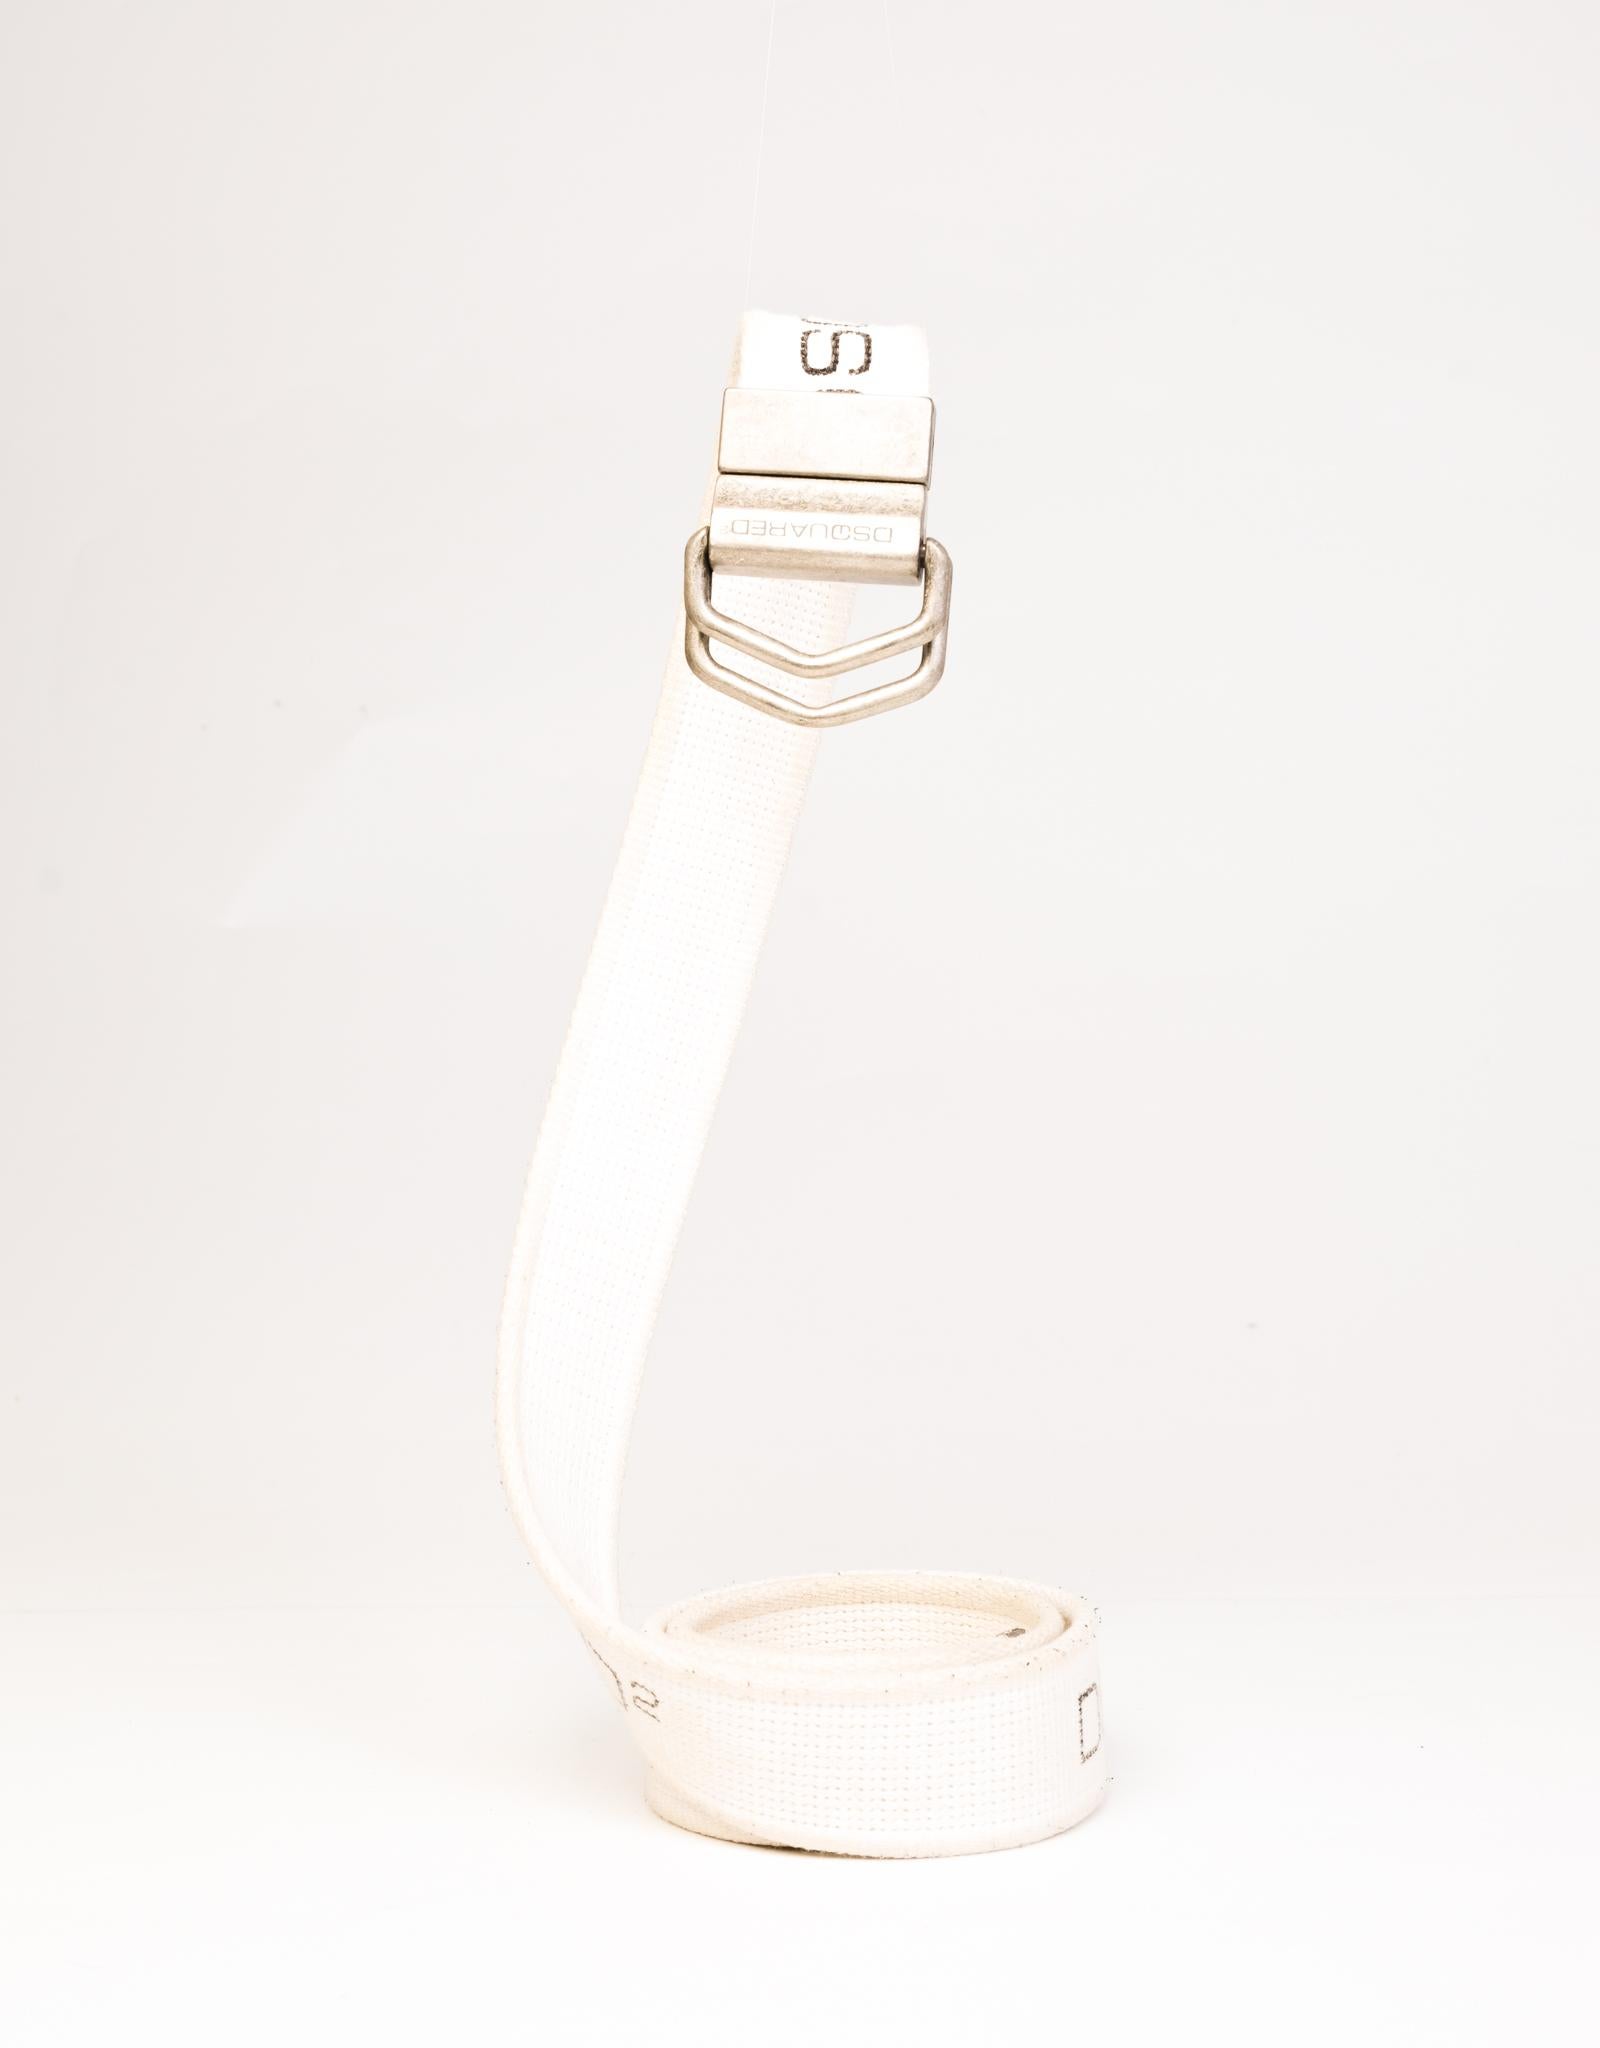 White logo-print slip-through belt from Dsquared2 featuring a grosgrain band, a printed logo, a D-ring buckle, silver-tone aged-style hardware and an adjustable fit.

COLOR: White
MATERIAL: Cloth
MEASURES: L 44” x W 1.5”
CONDITION: Good  - belt